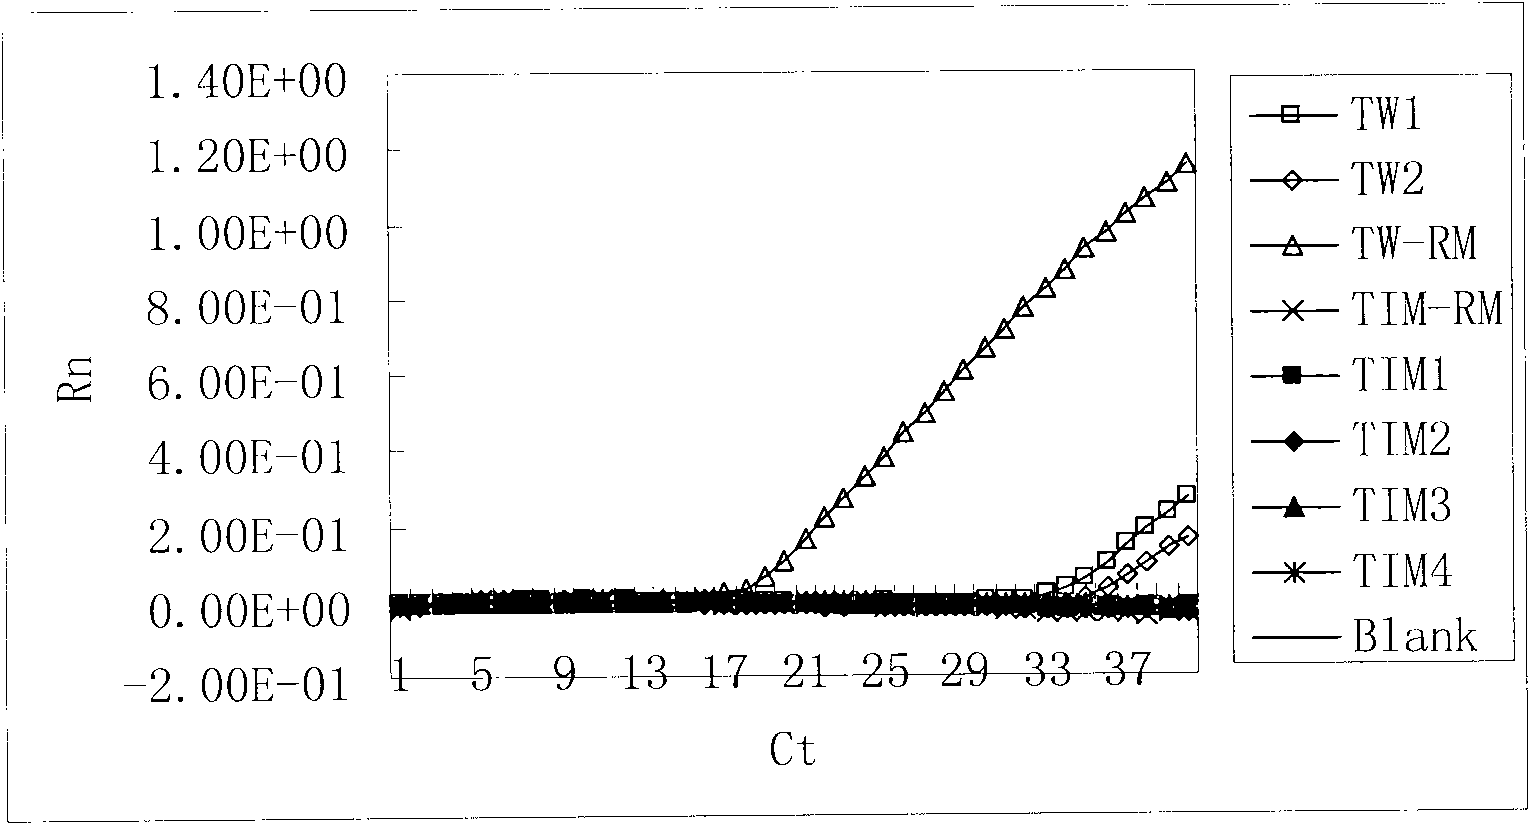 Standard molecule for detecting tilletia walkeri castebury&carris and construction method thereof